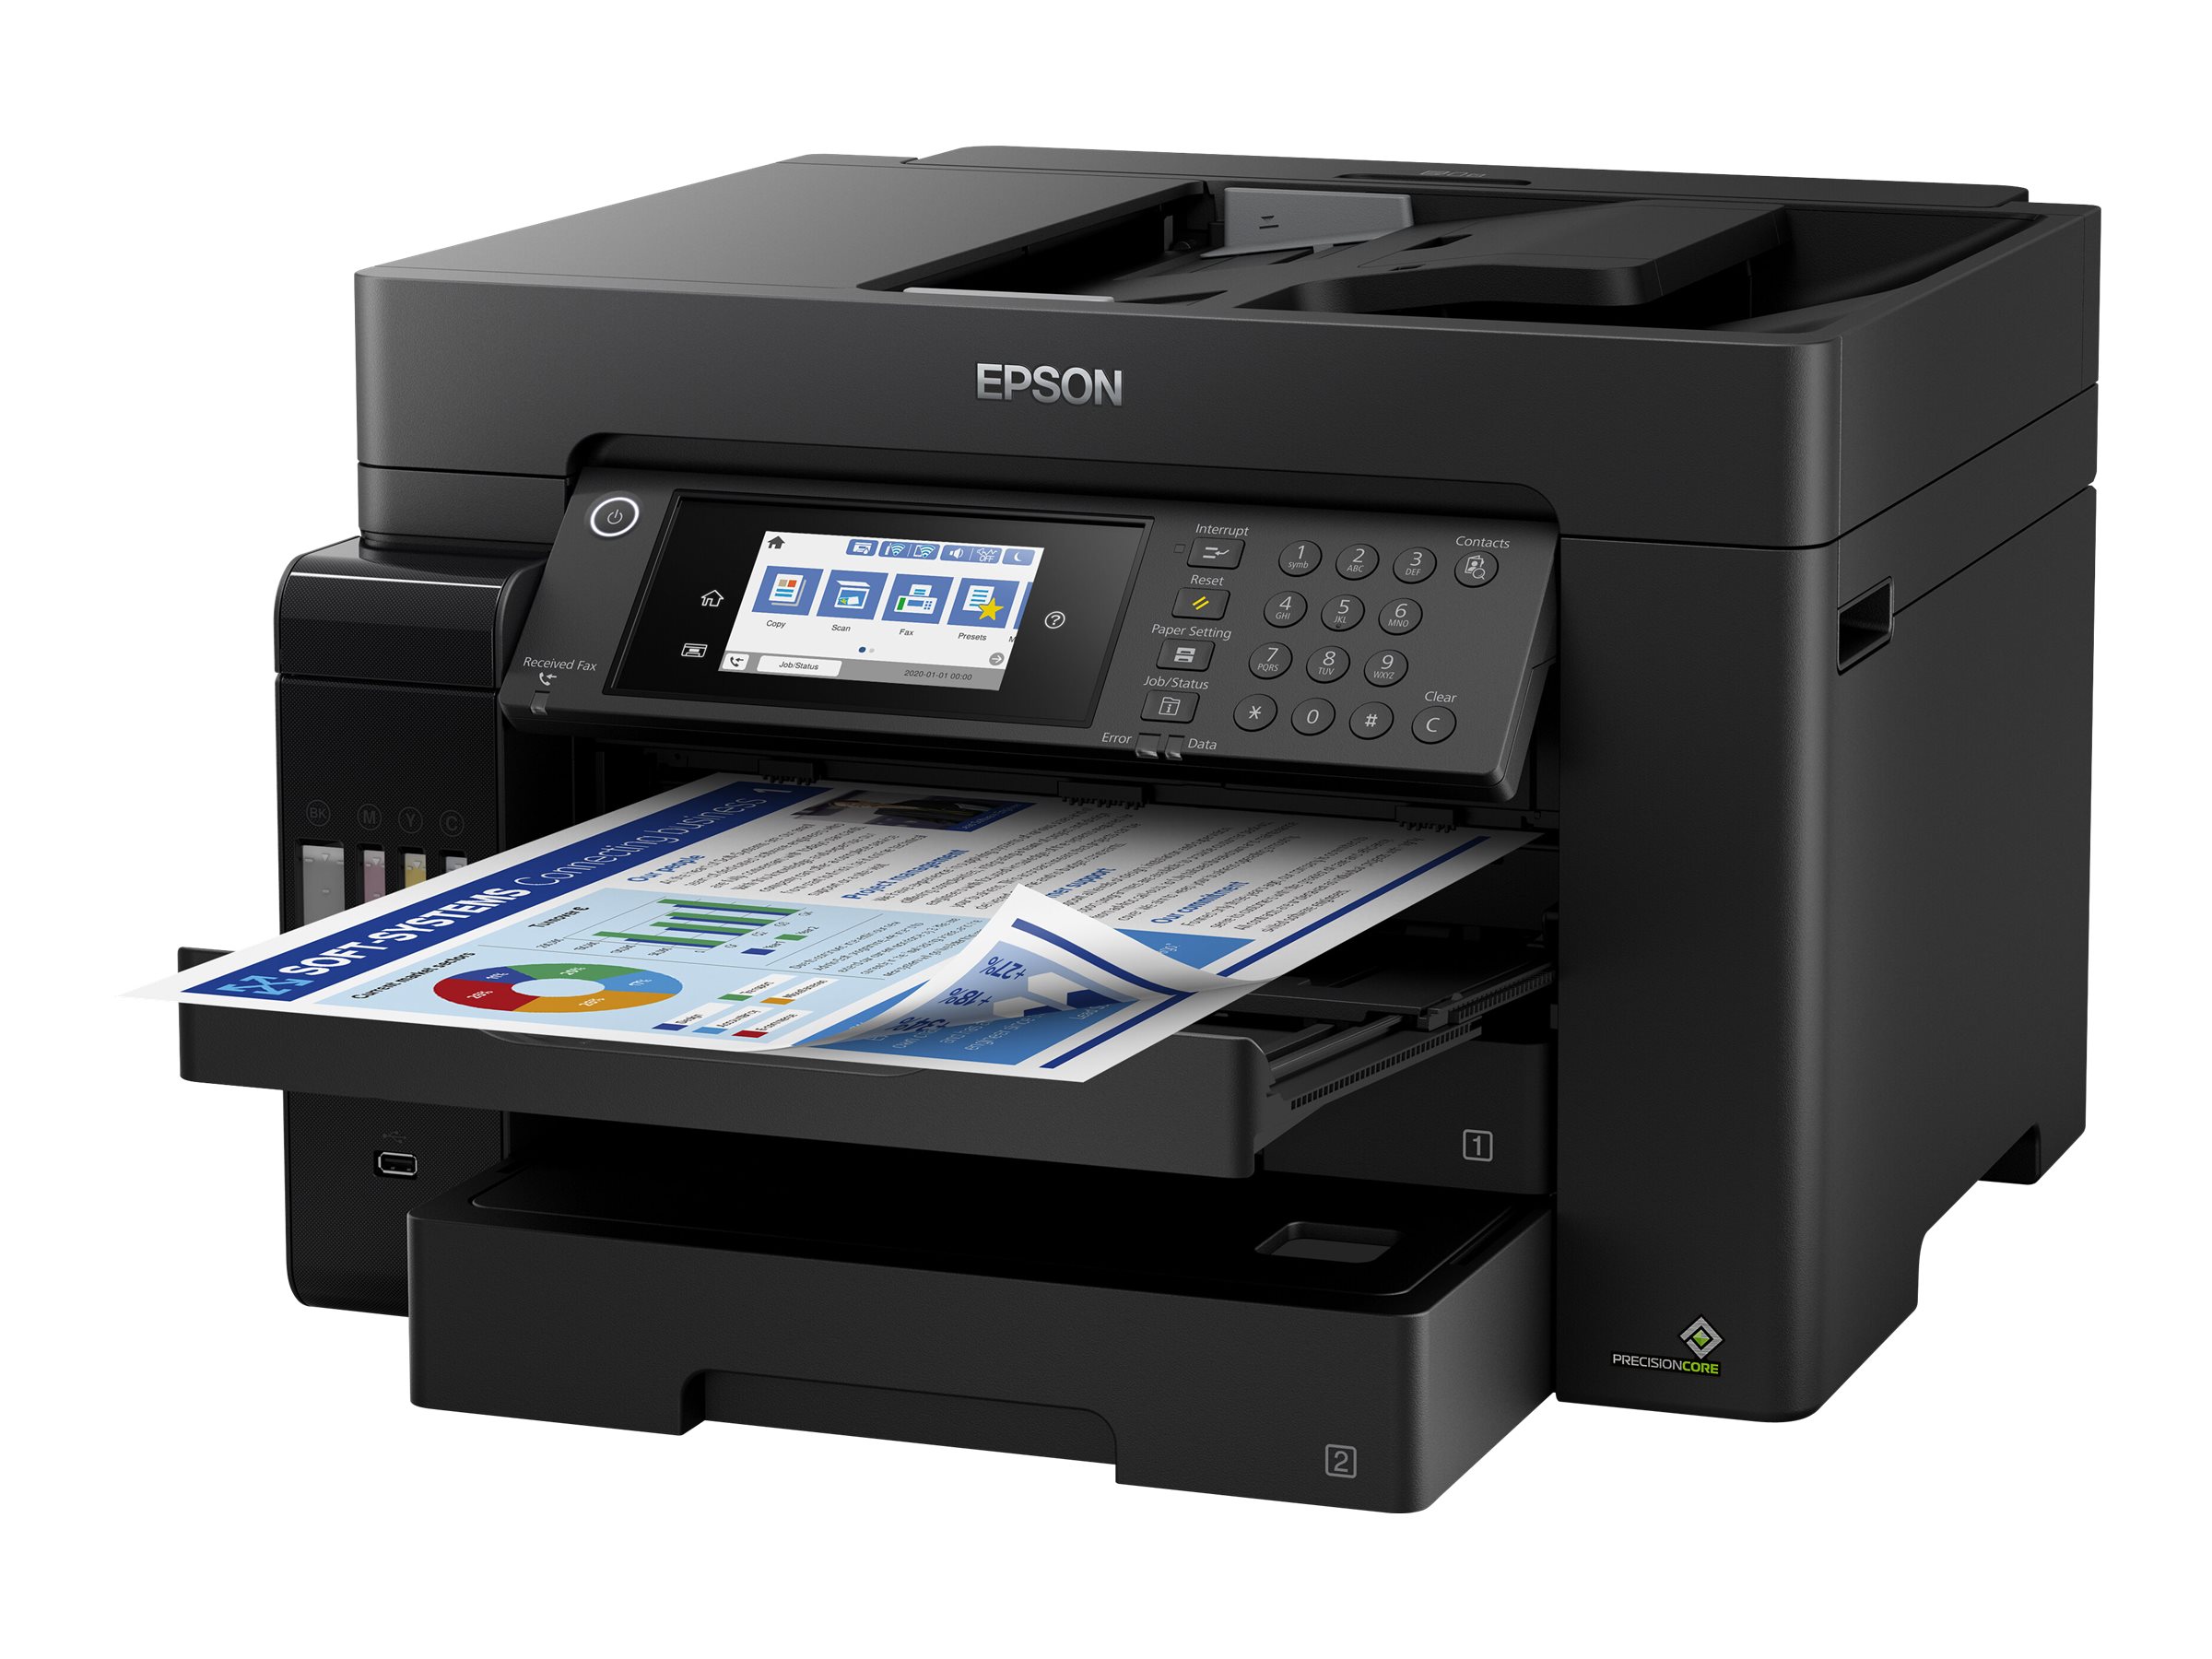 Epson EcoTank A3 Size Single and Multifunction Price $550.00 in Phsar Depou  Bei, Cambodia - CamIT Computer